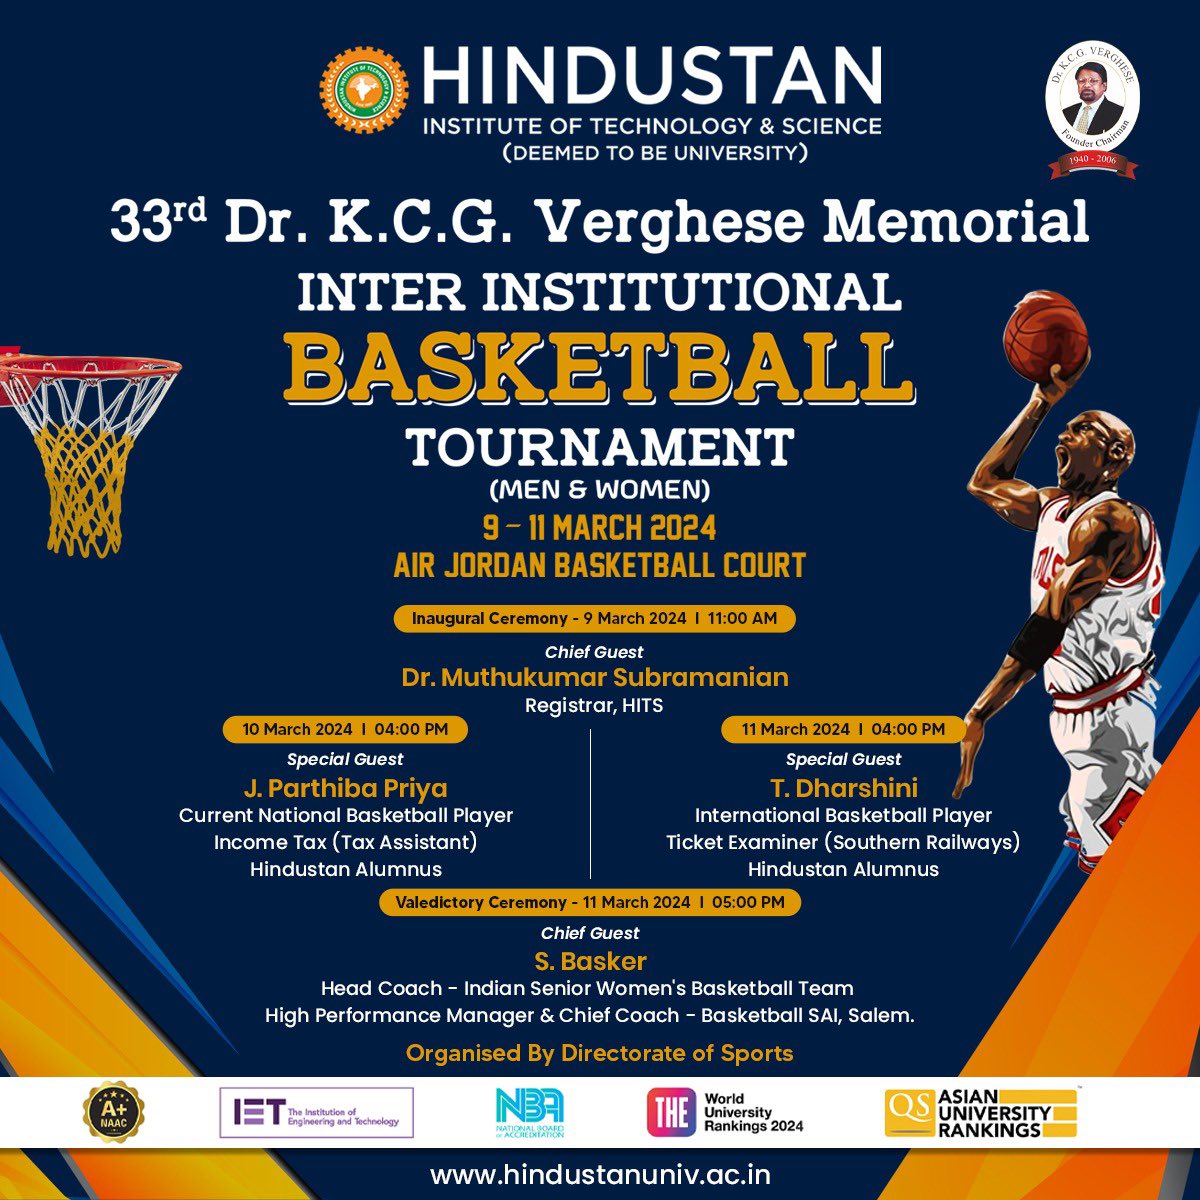 The 33rd Dr. KCG Verghese Memorial Inter Institutional Basketball Tournament is set to kick off, at HITS.
#HITS #MyHindustan #HindustanUniversity #Hindustangroupofinstitutions #growwithhindustan #dranandjacobverghese
#drkcgverghesememorial #basketballtournament #hitssports